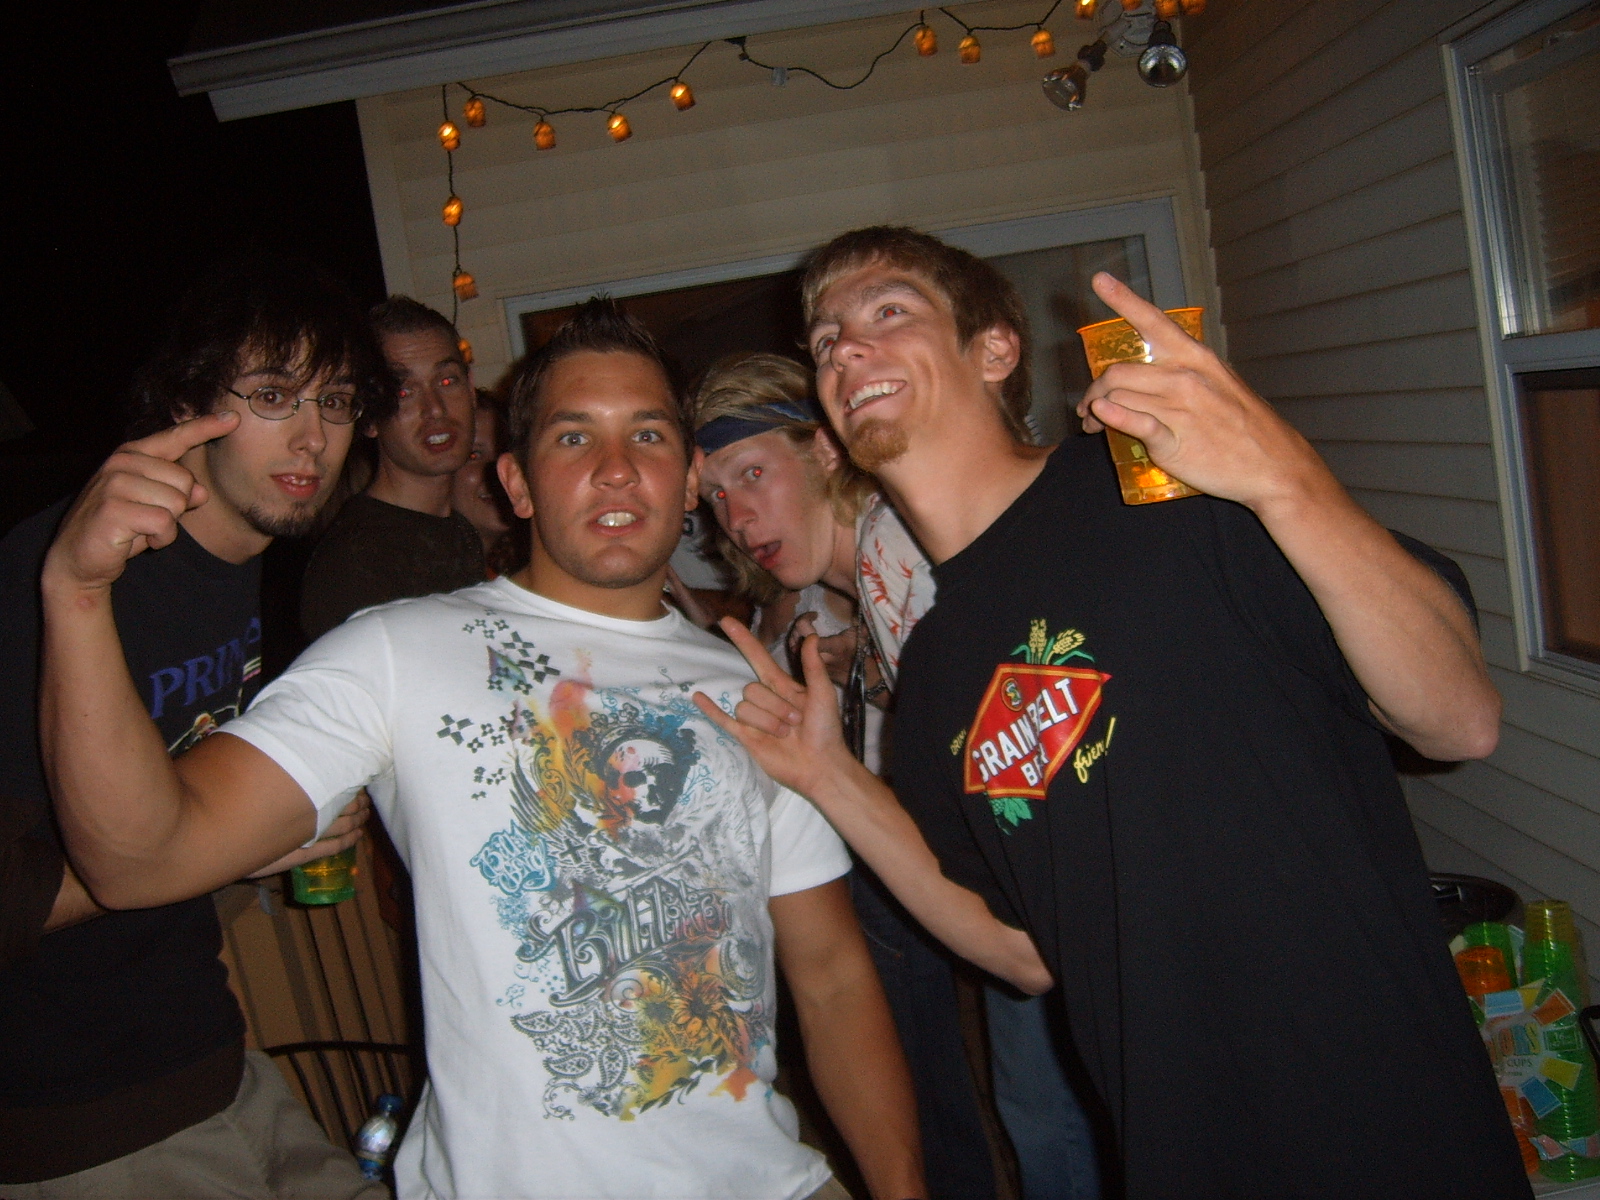 Adolescent boys drinking at a party.^[[Image](https://www.flickr.com/photos/opie/851920920) by [theopie](https://www.flickr.com/photos/opie/) is licensed under [CC BY 2.0](https://creativecommons.org/licenses/by/2.0/)]